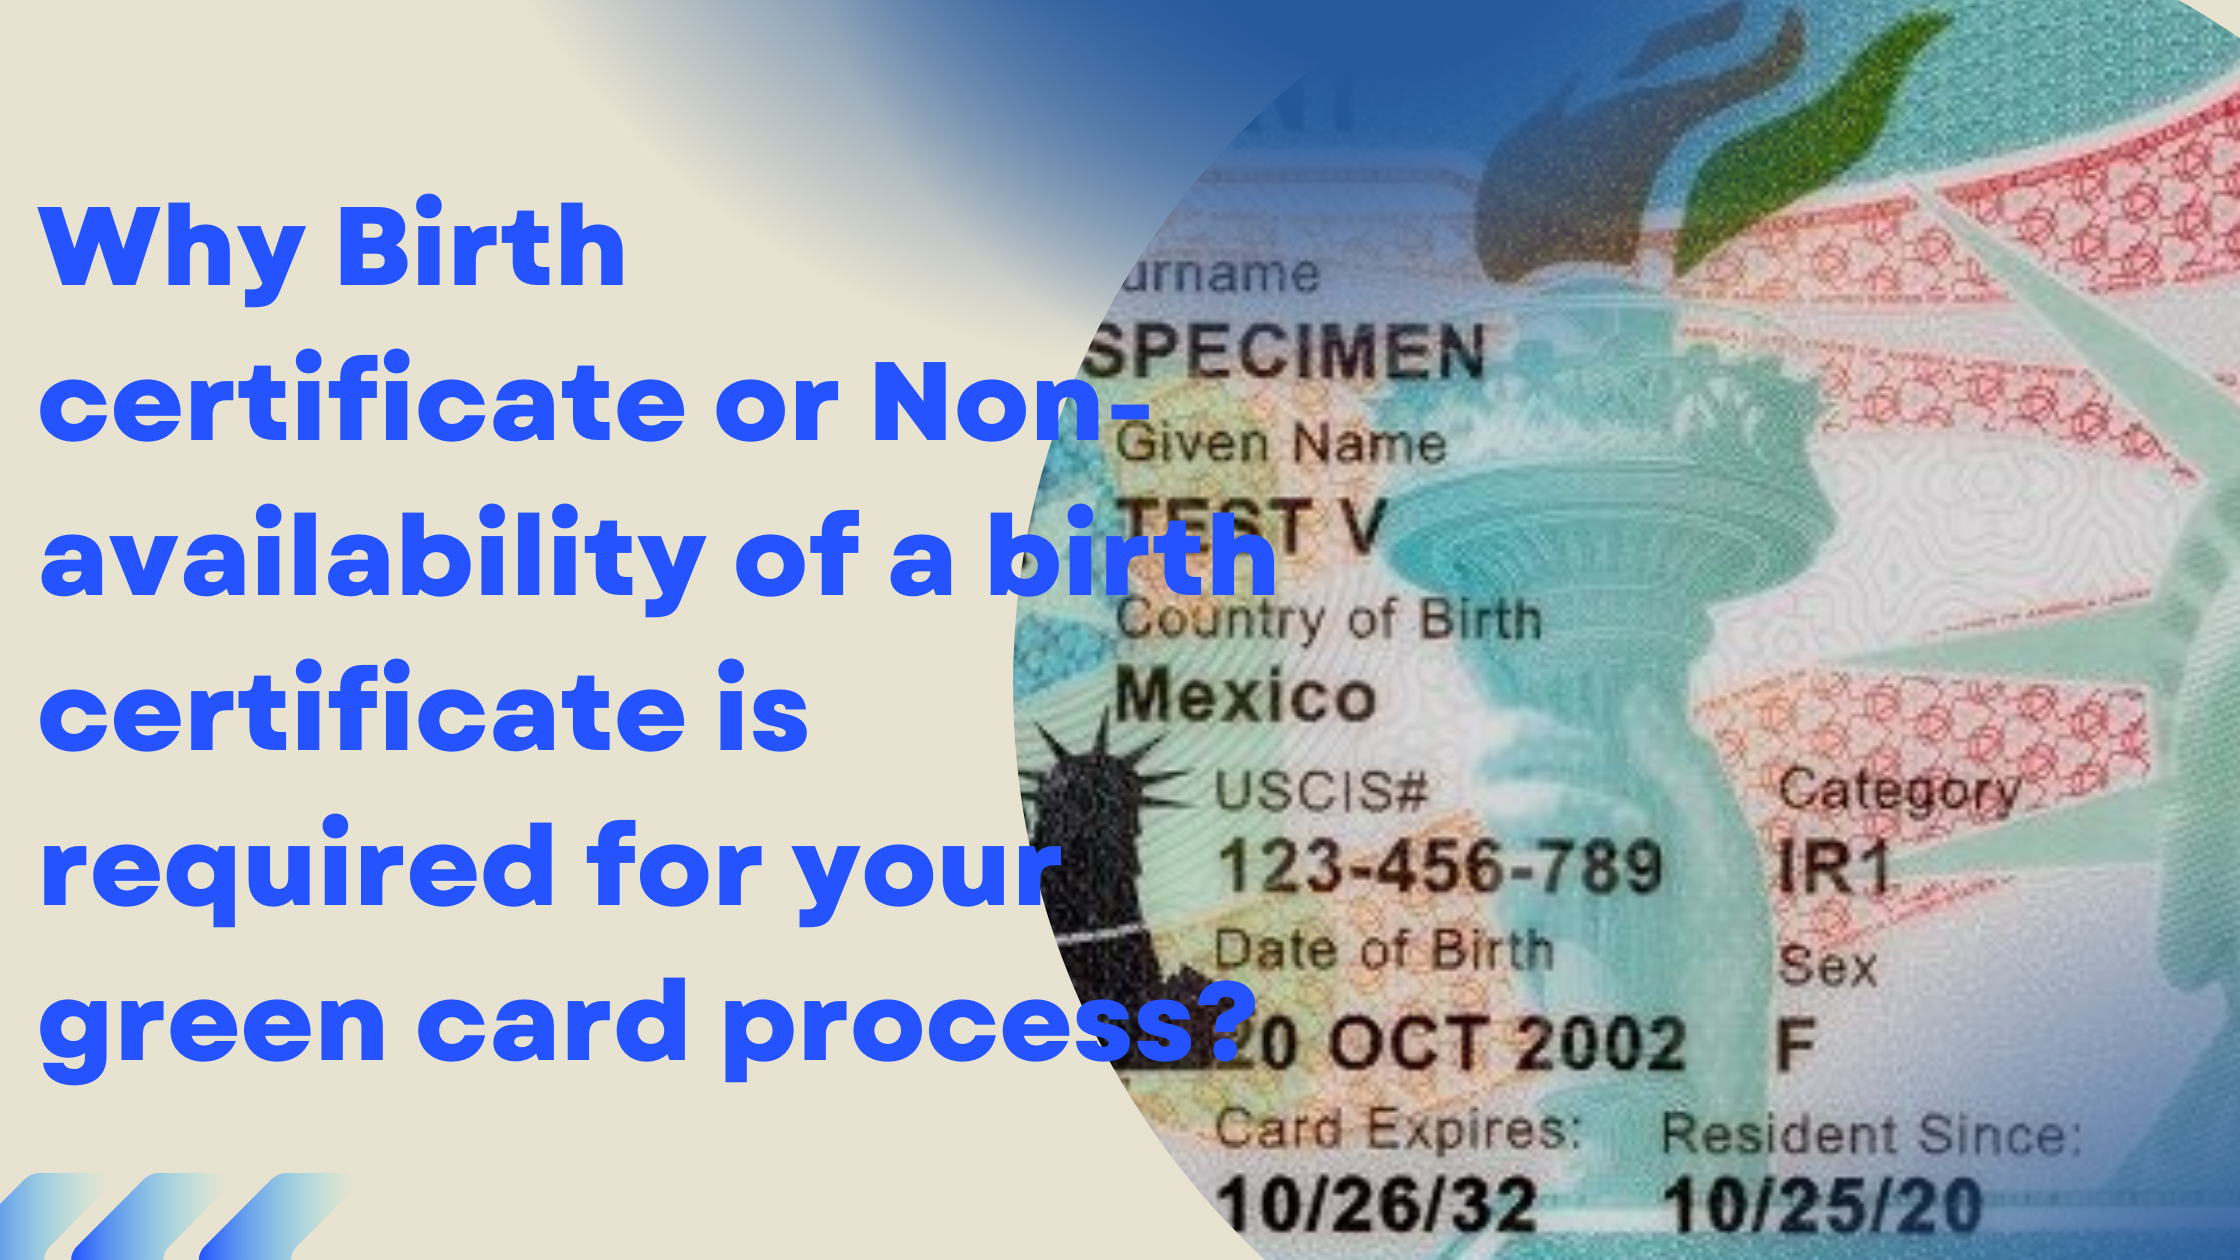 Why Birth certificate or Non-availability of a birth certificate is required for your green card process?